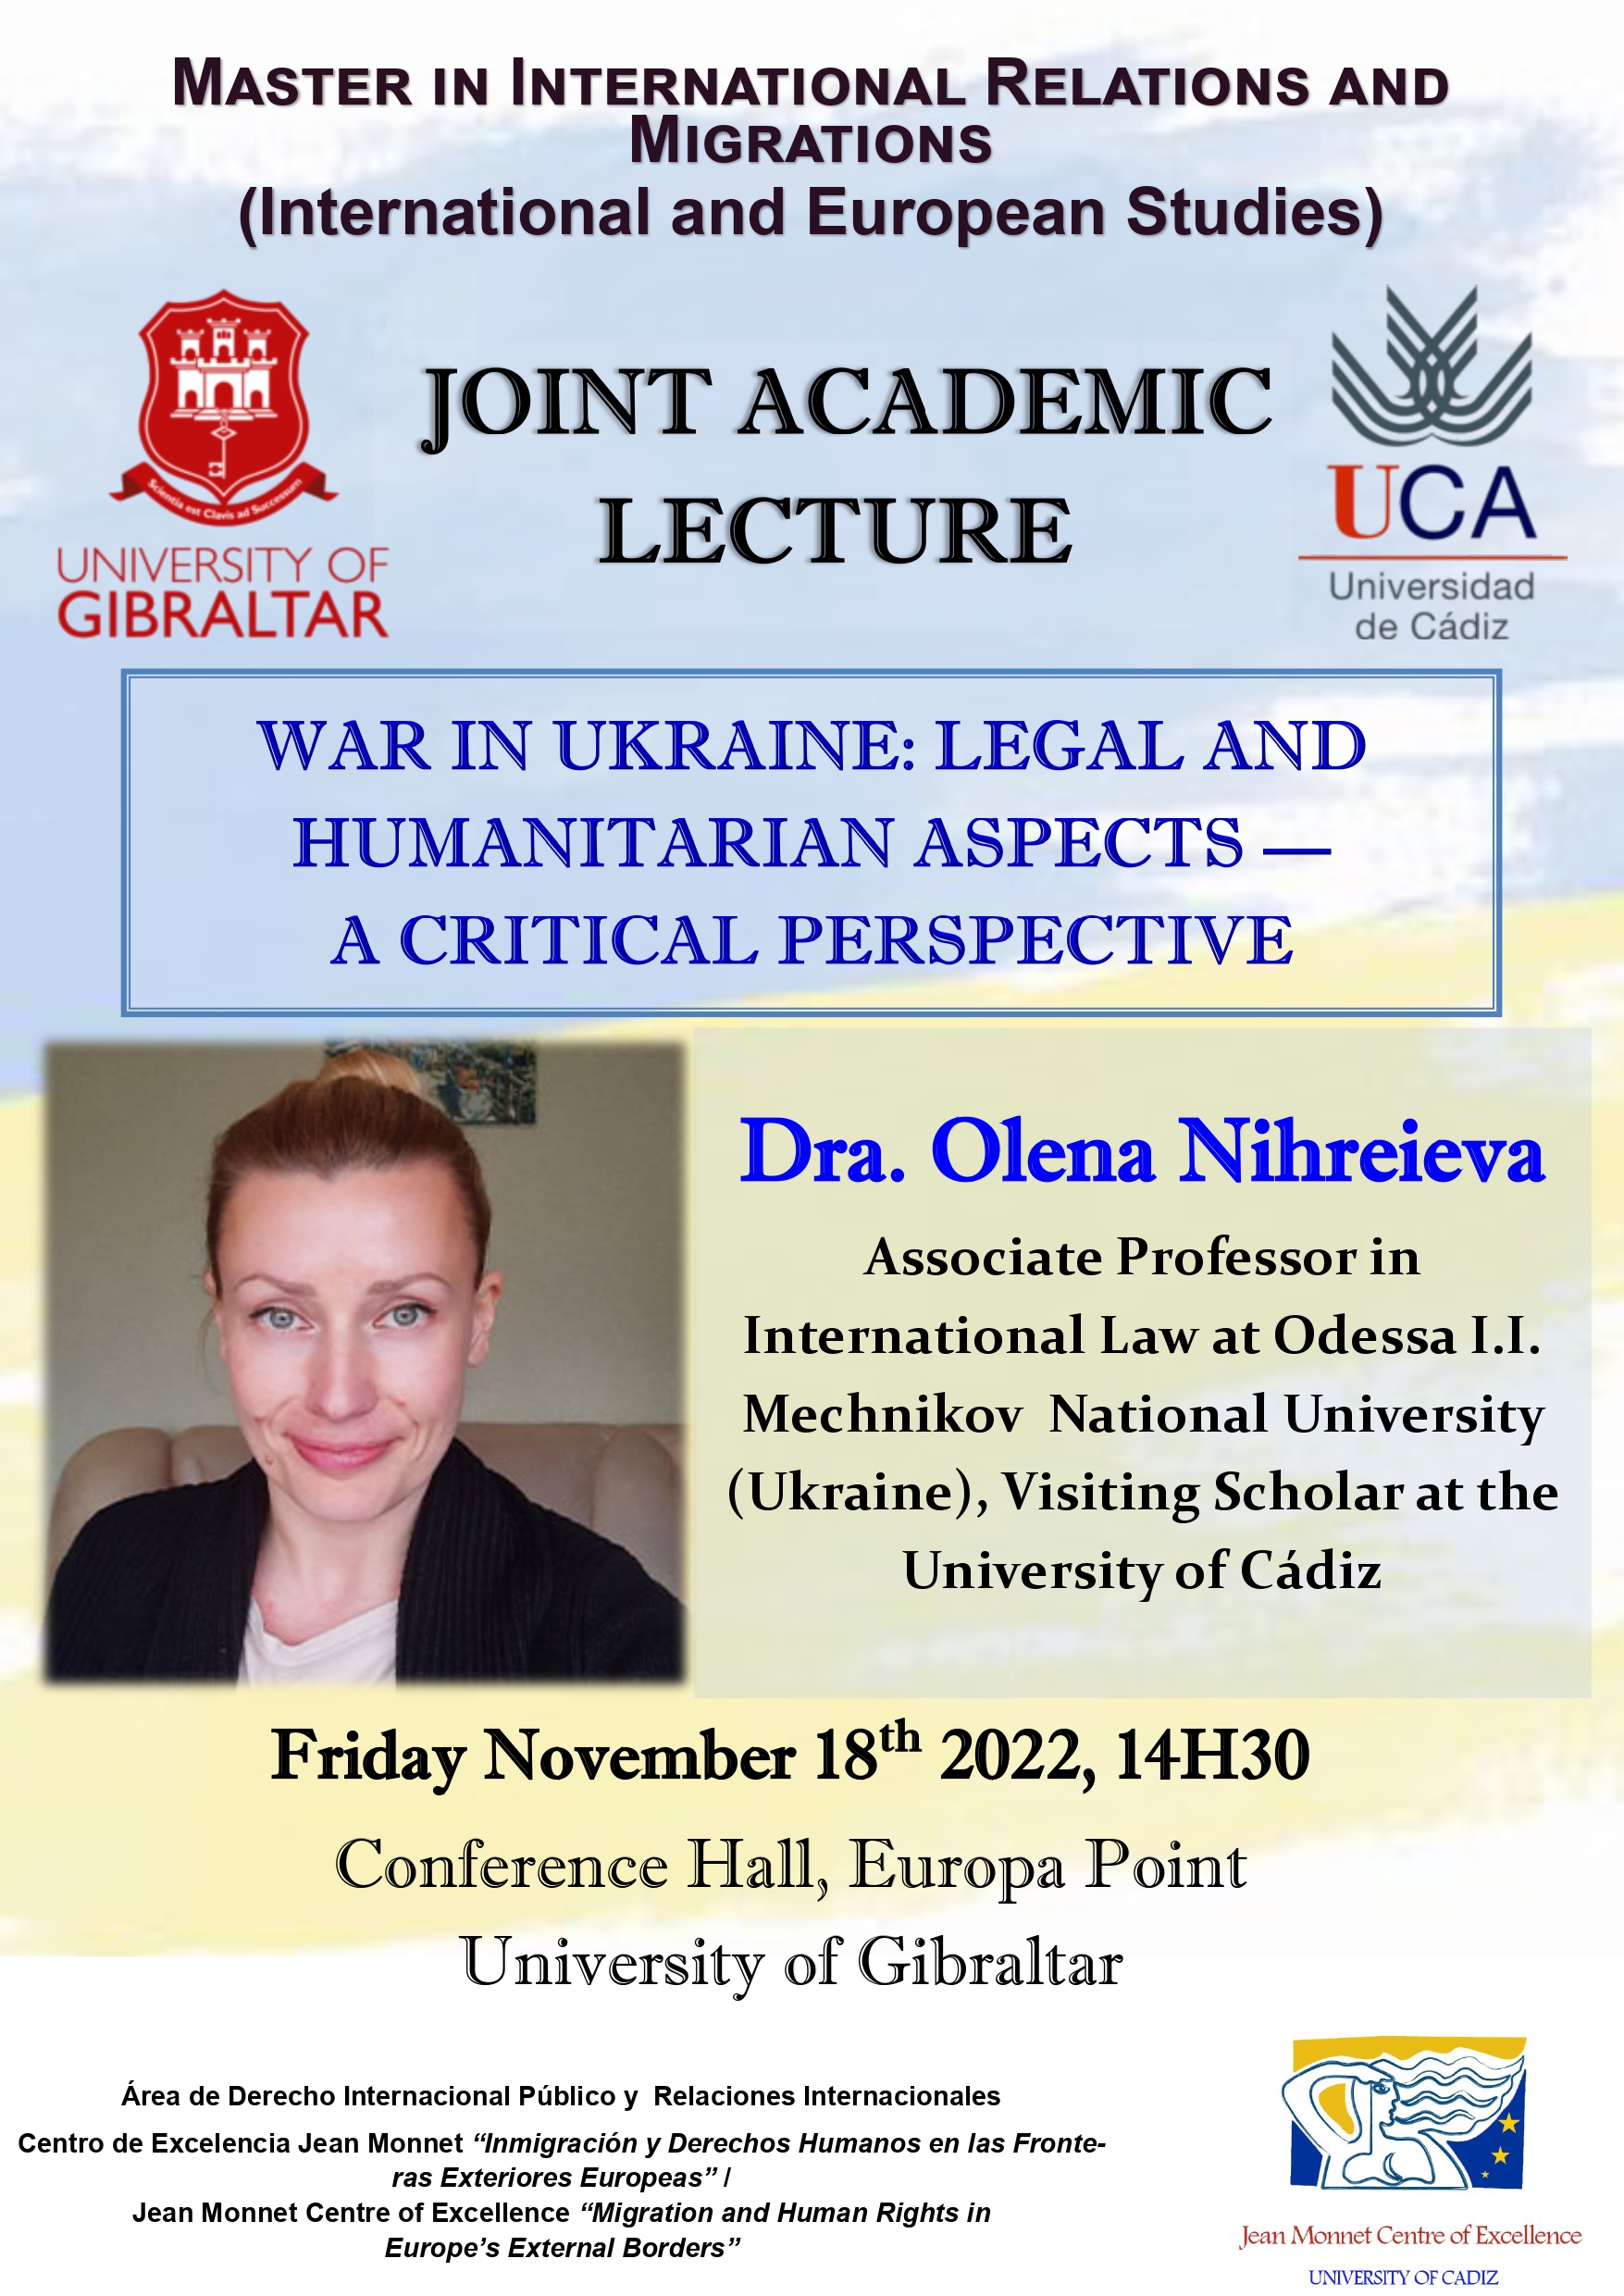 CONFERENCIA – War in Ukraine: Legal and Humanitarian Aspects – A Critical Perspective, Dra....